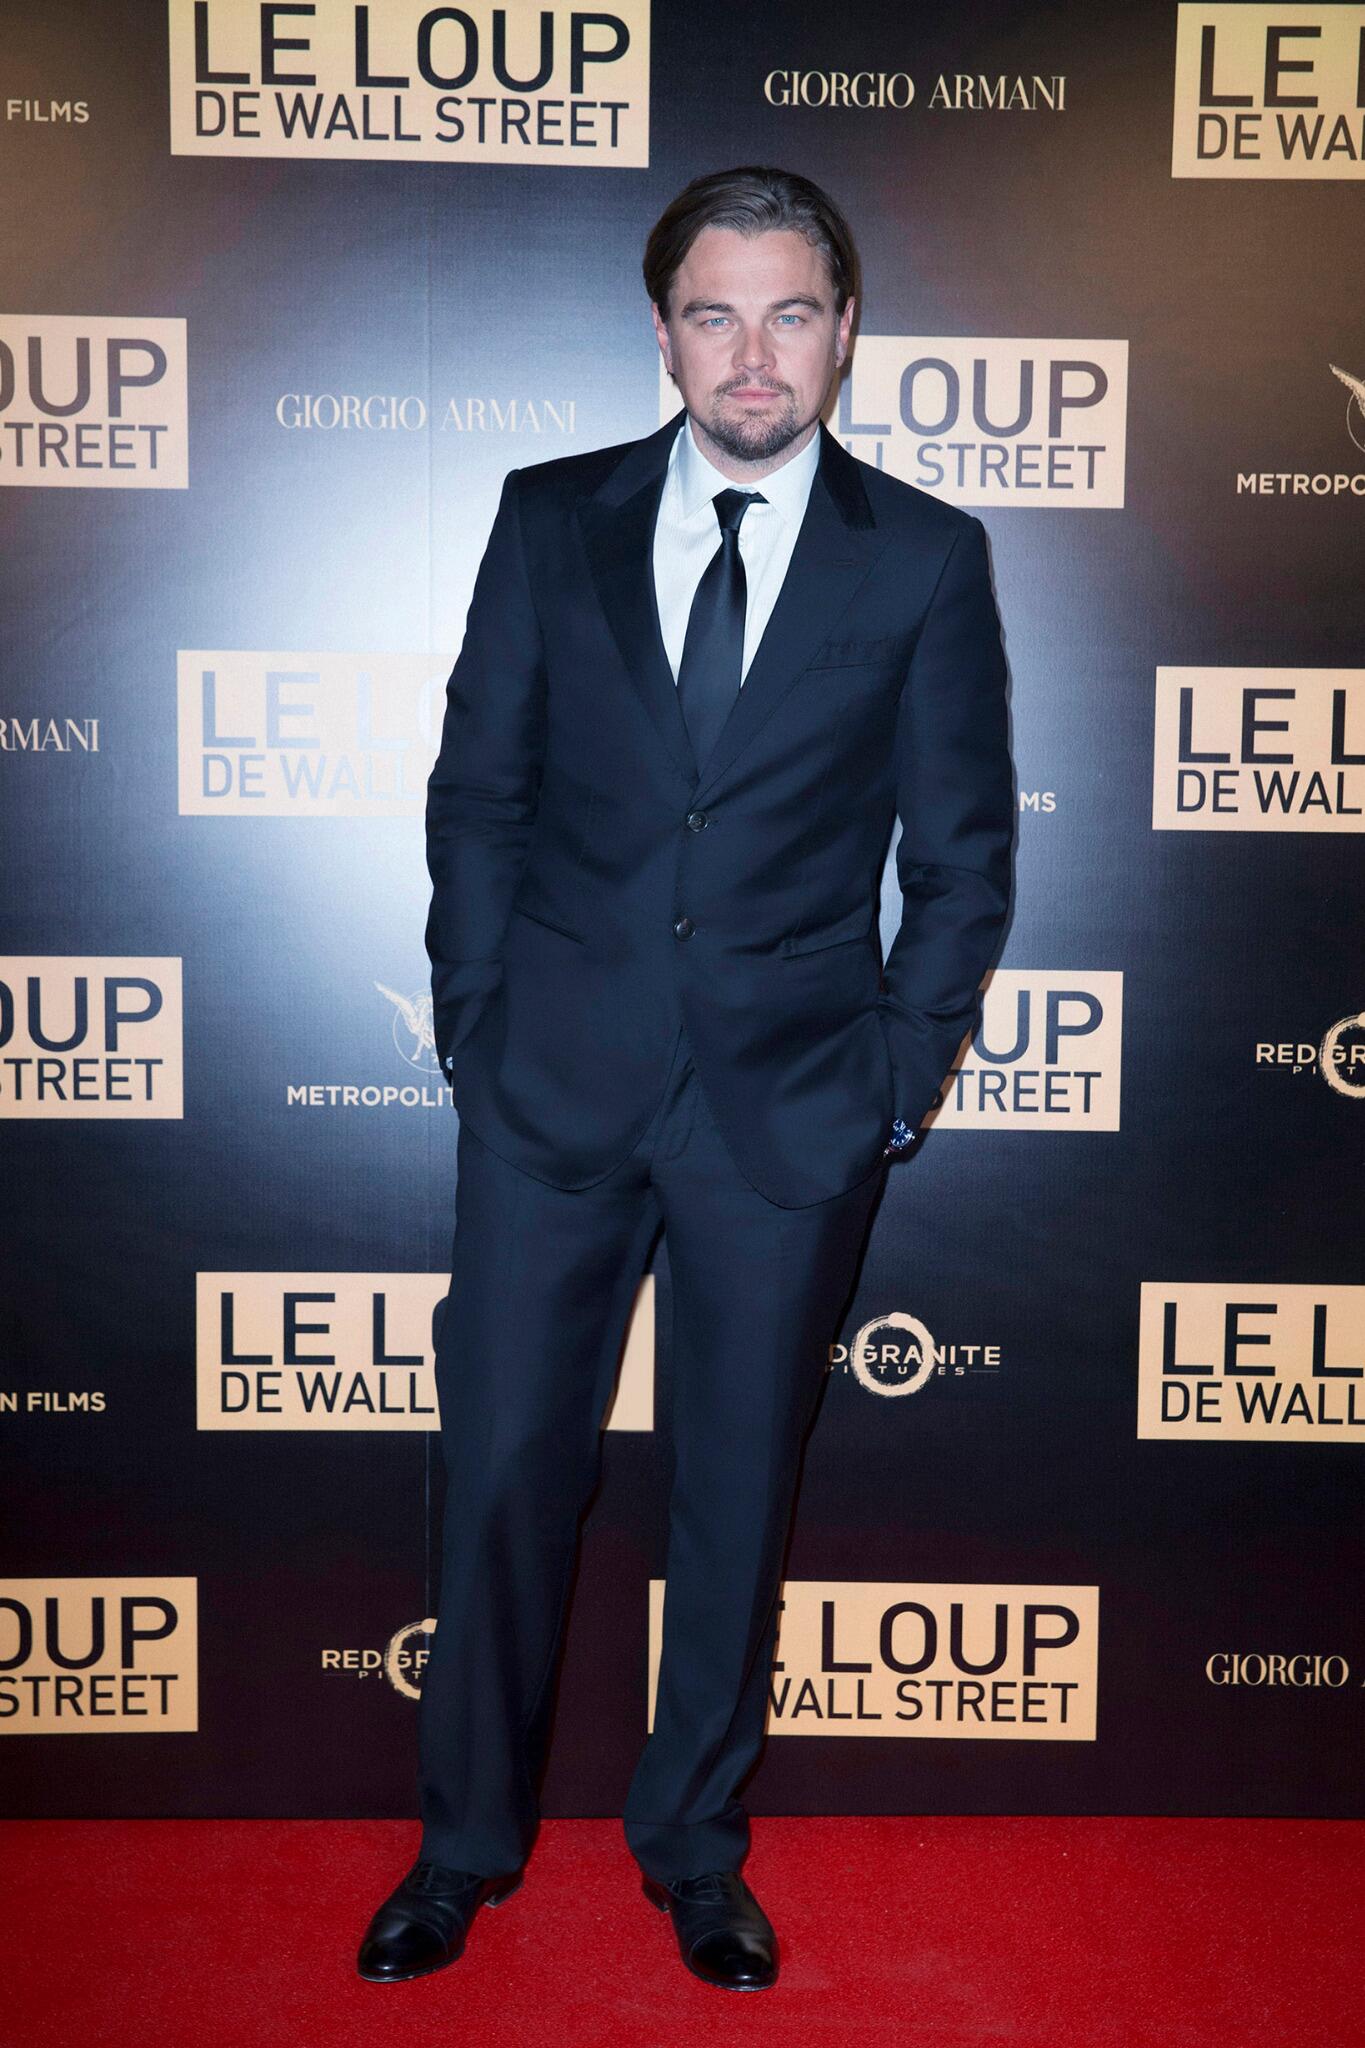 board Decipher welding Armani ar Twitter: "Leonardo DiCaprio wore a Giorgio Armani suit to the  Paris premiere of “The Wolf of Wall Street” http://t.co/2c7QpIsrVM" /  Twitter